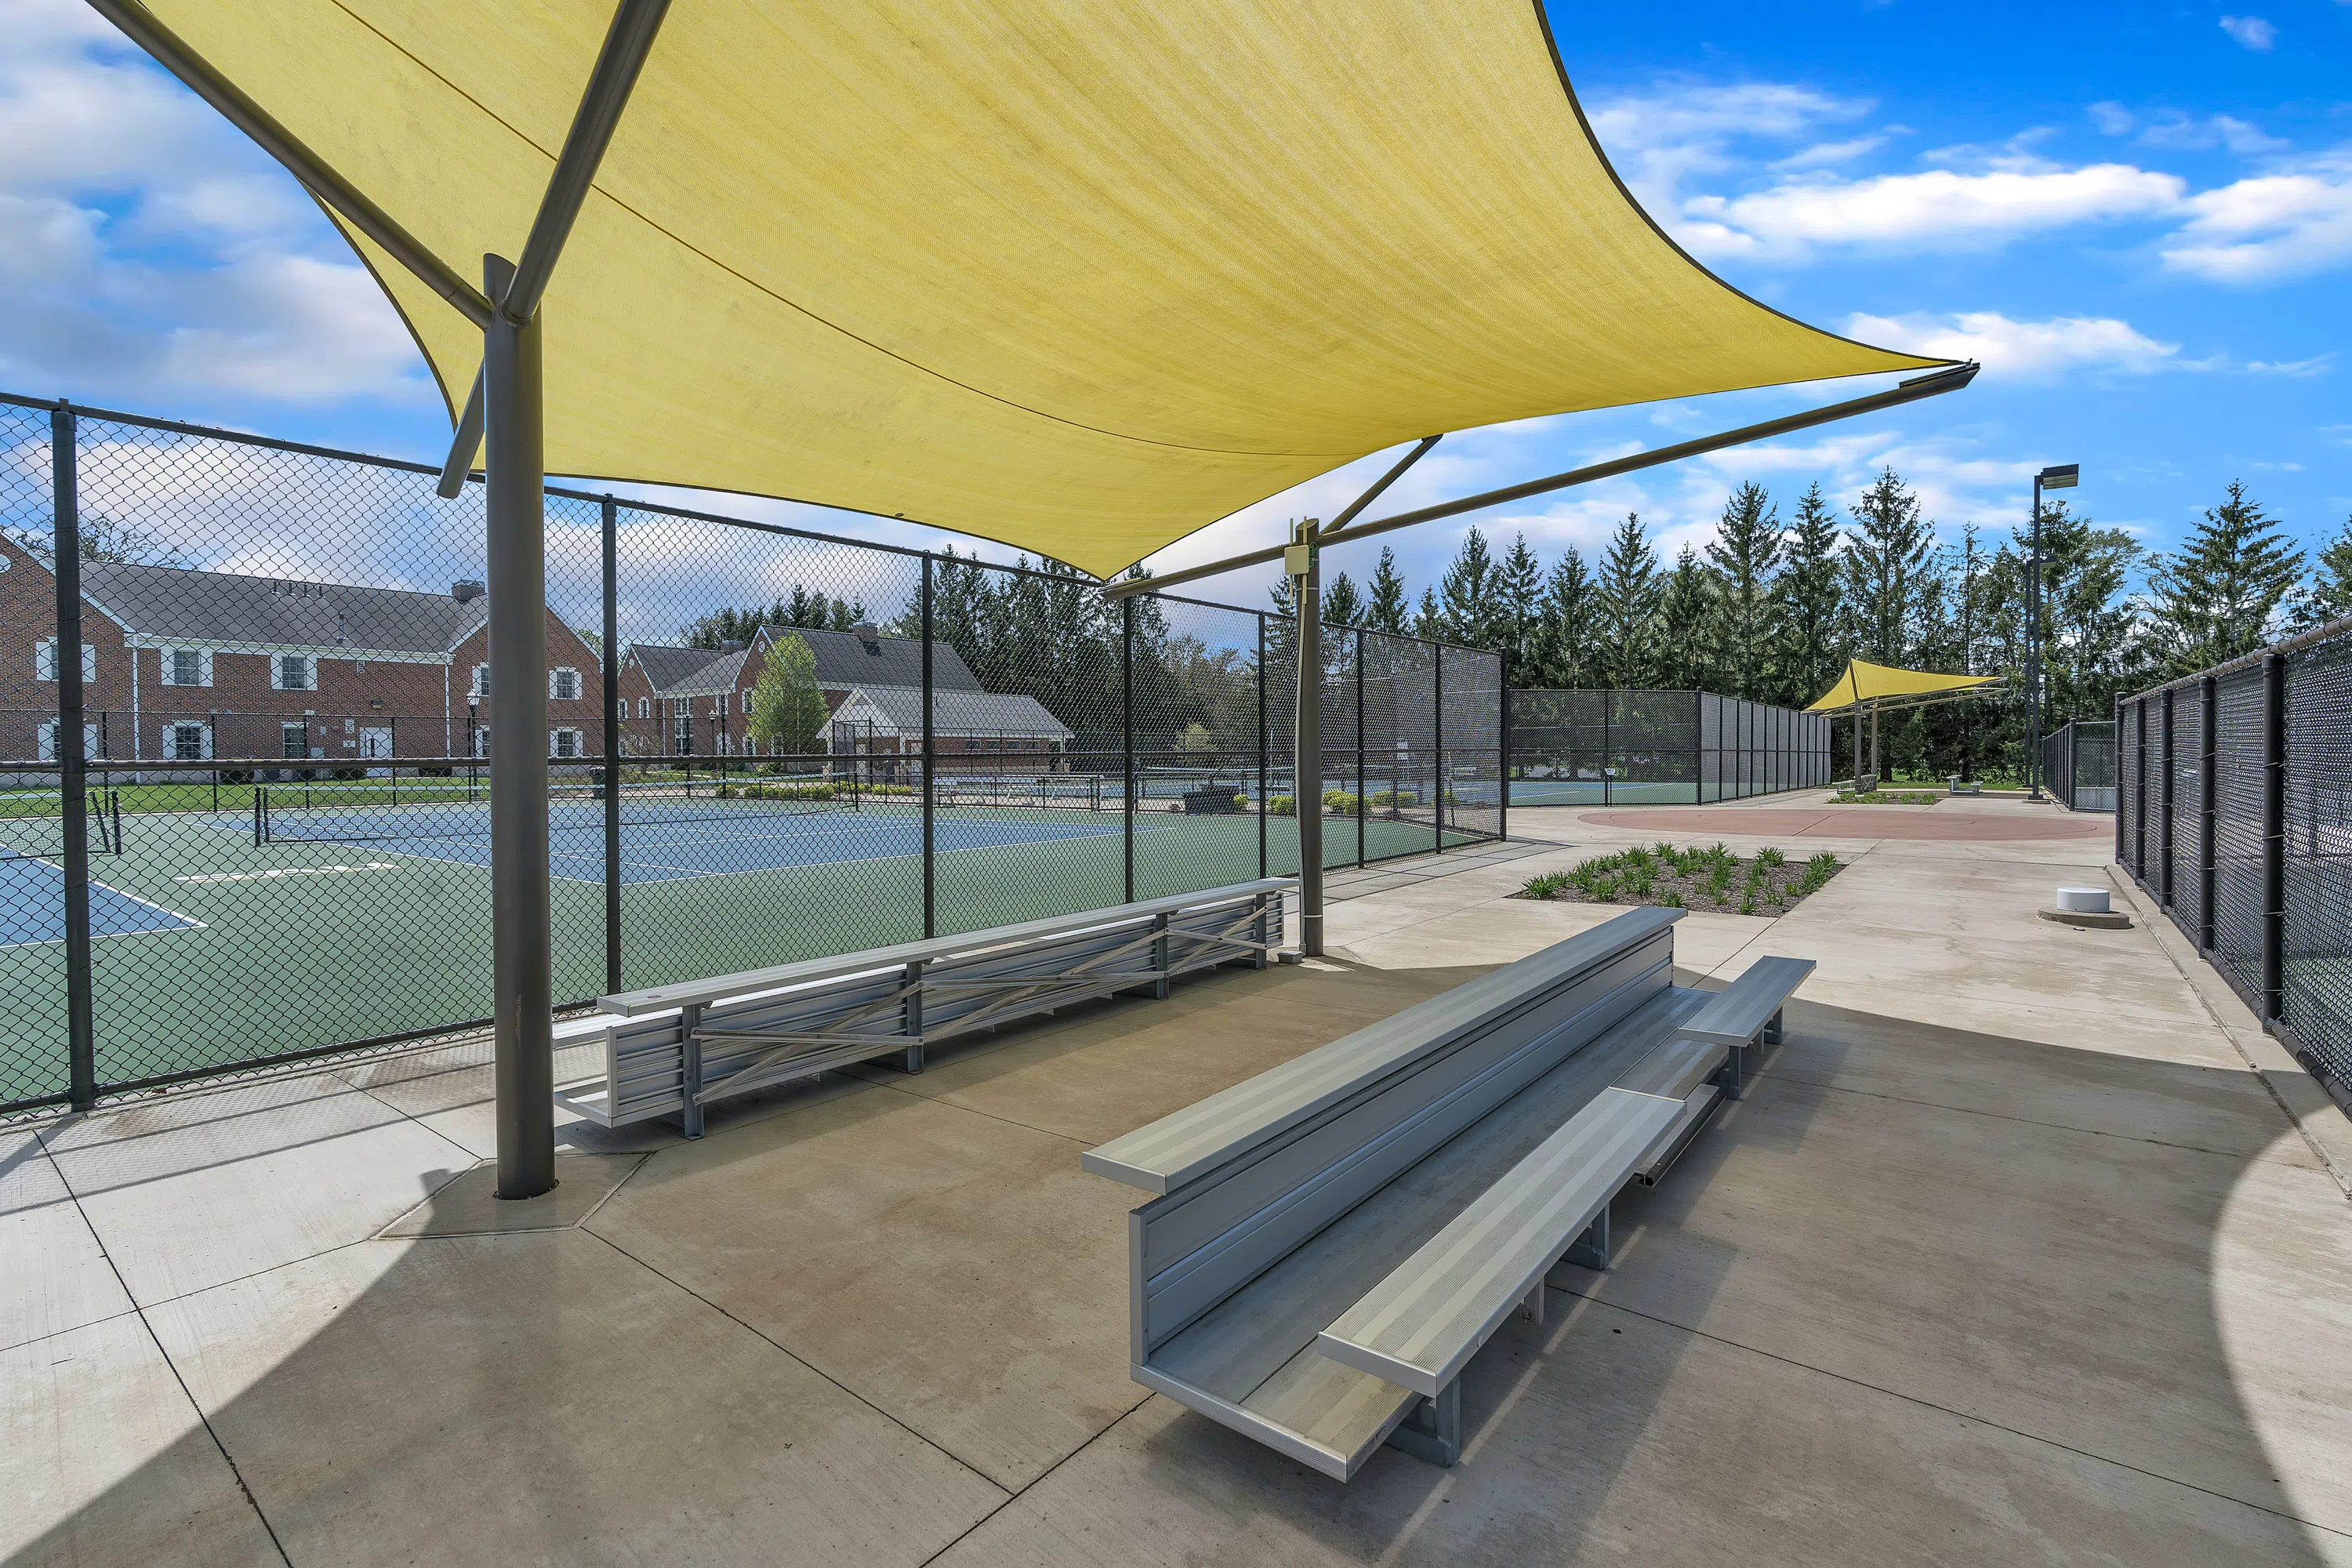 Outdoor space by the tennis courts